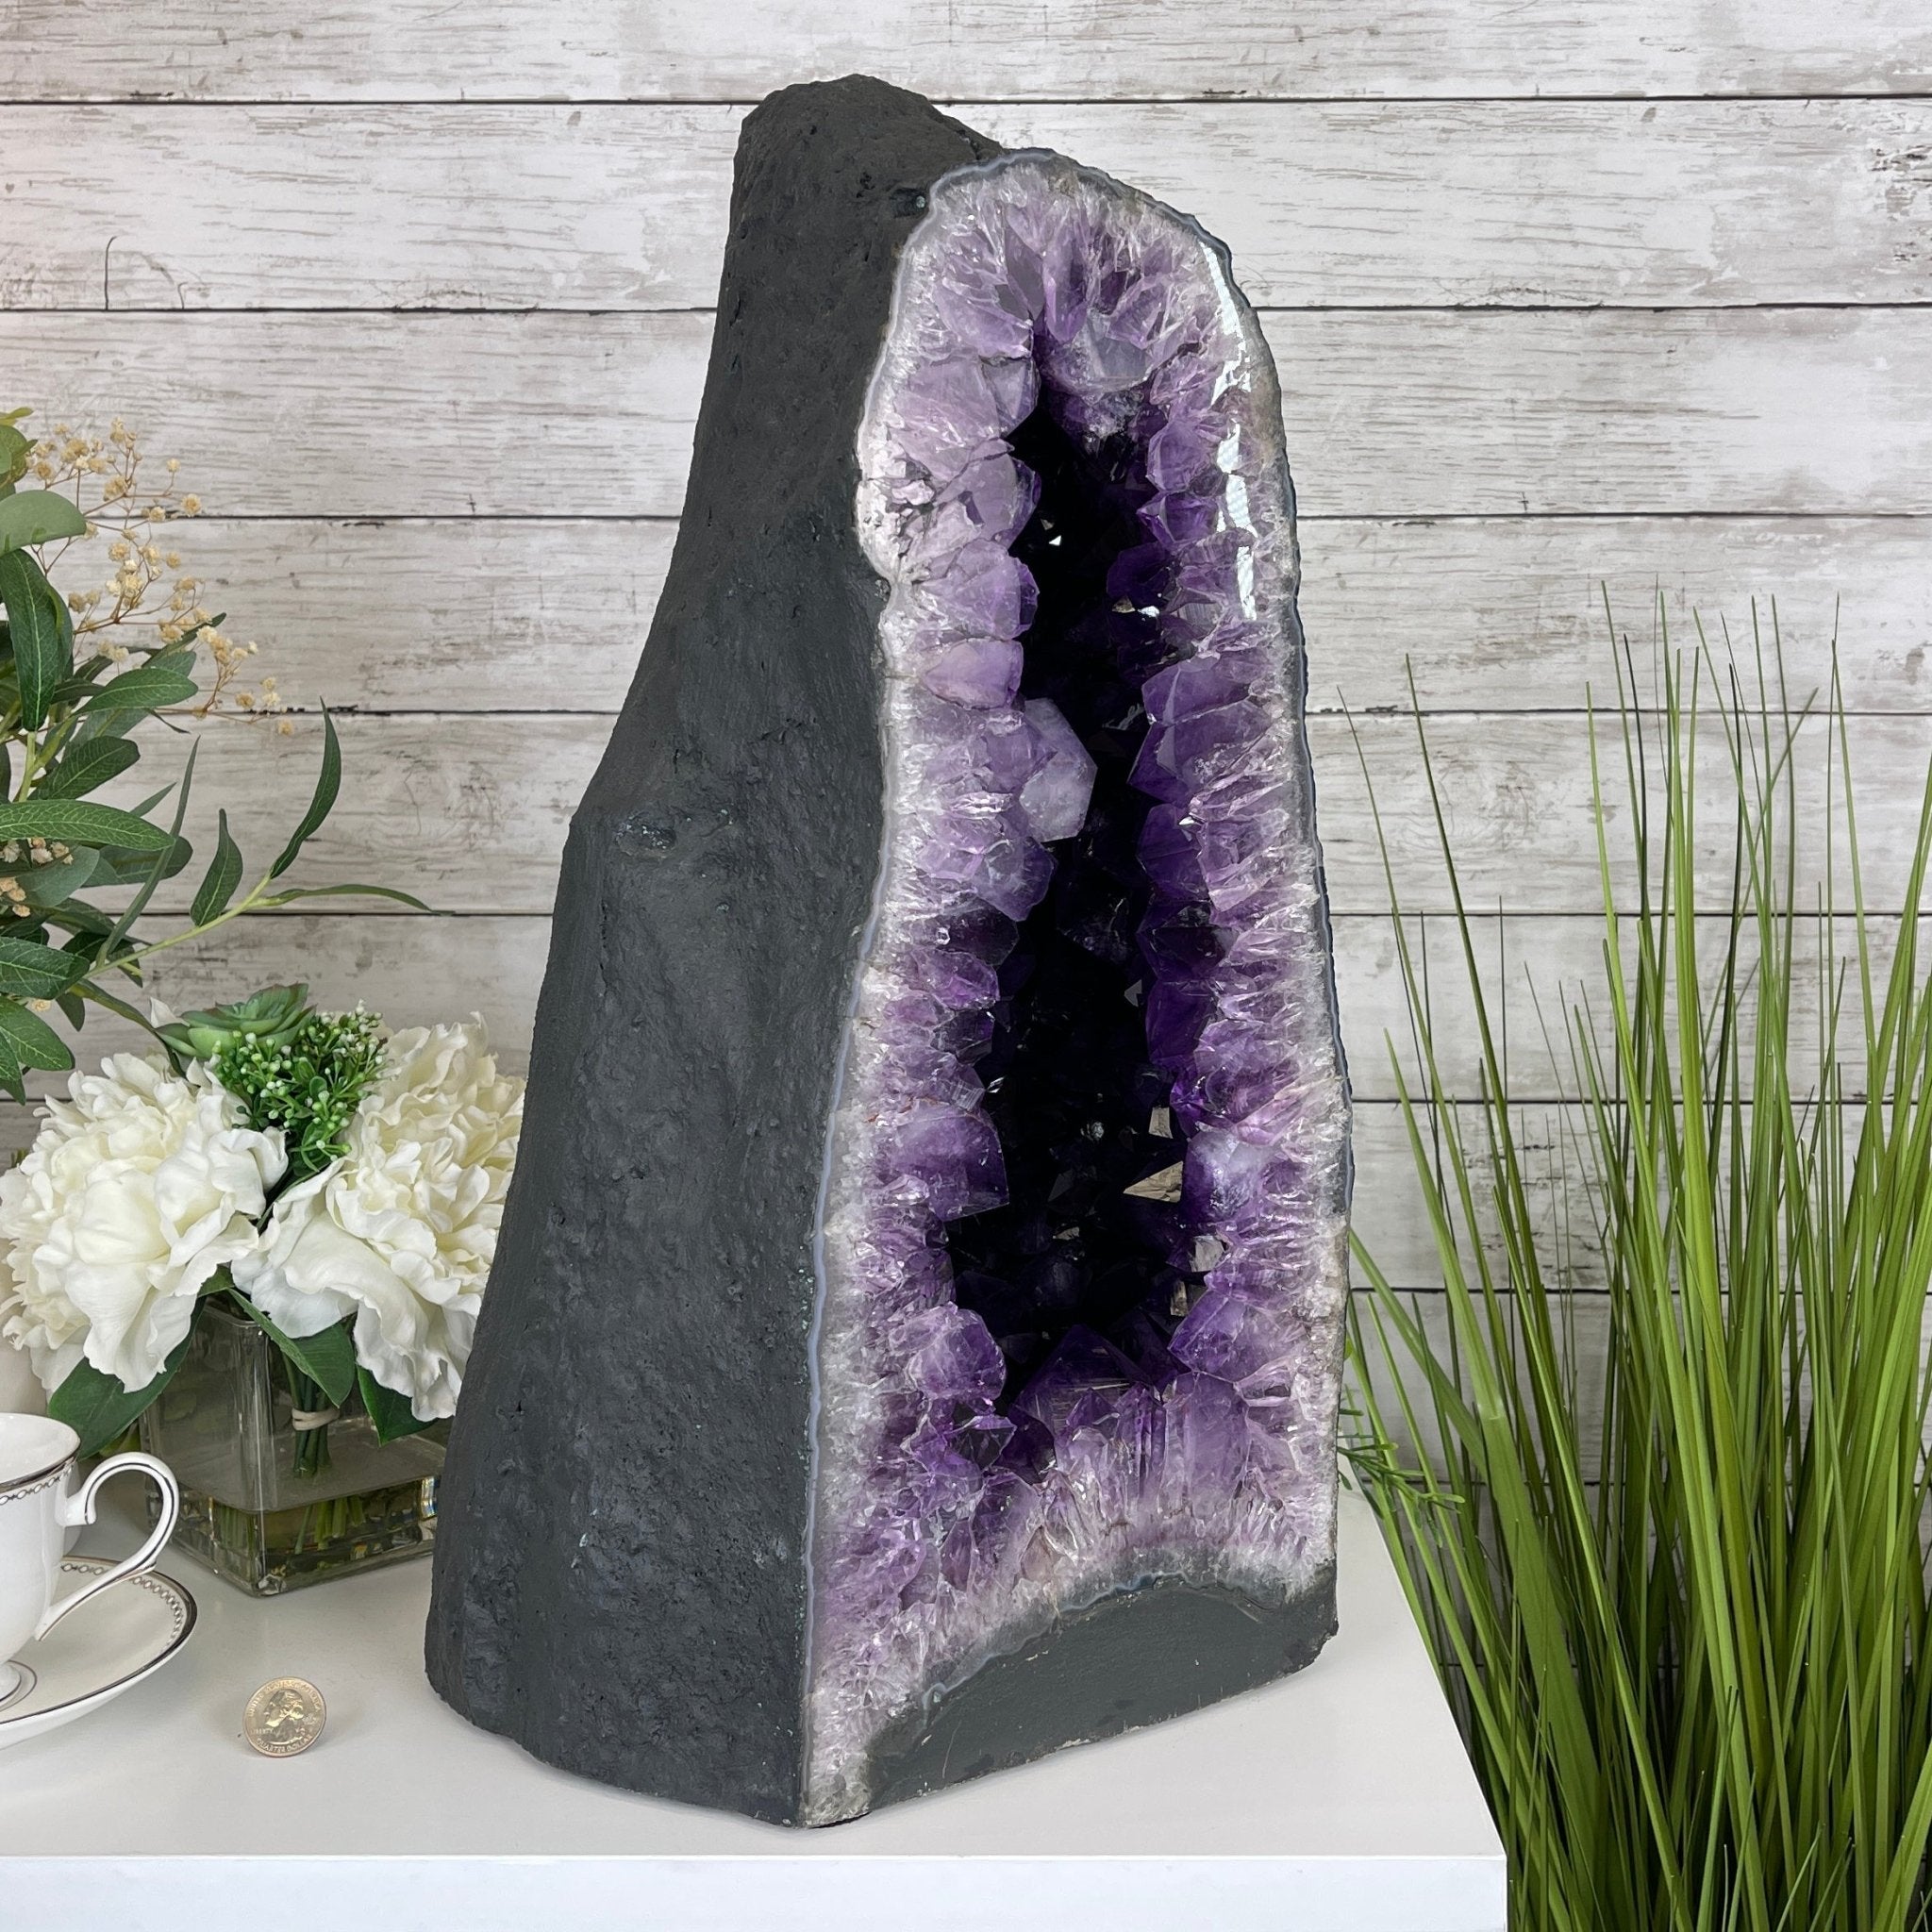 Extra Quality Brazilian Amethyst Cathedral, 19.6” tall & 81.4 lbs #5601-0708 by Brazil Gems - Brazil GemsBrazil GemsExtra Quality Brazilian Amethyst Cathedral, 19.6” tall & 81.4 lbs #5601-0708 by Brazil GemsCathedrals5601-0708